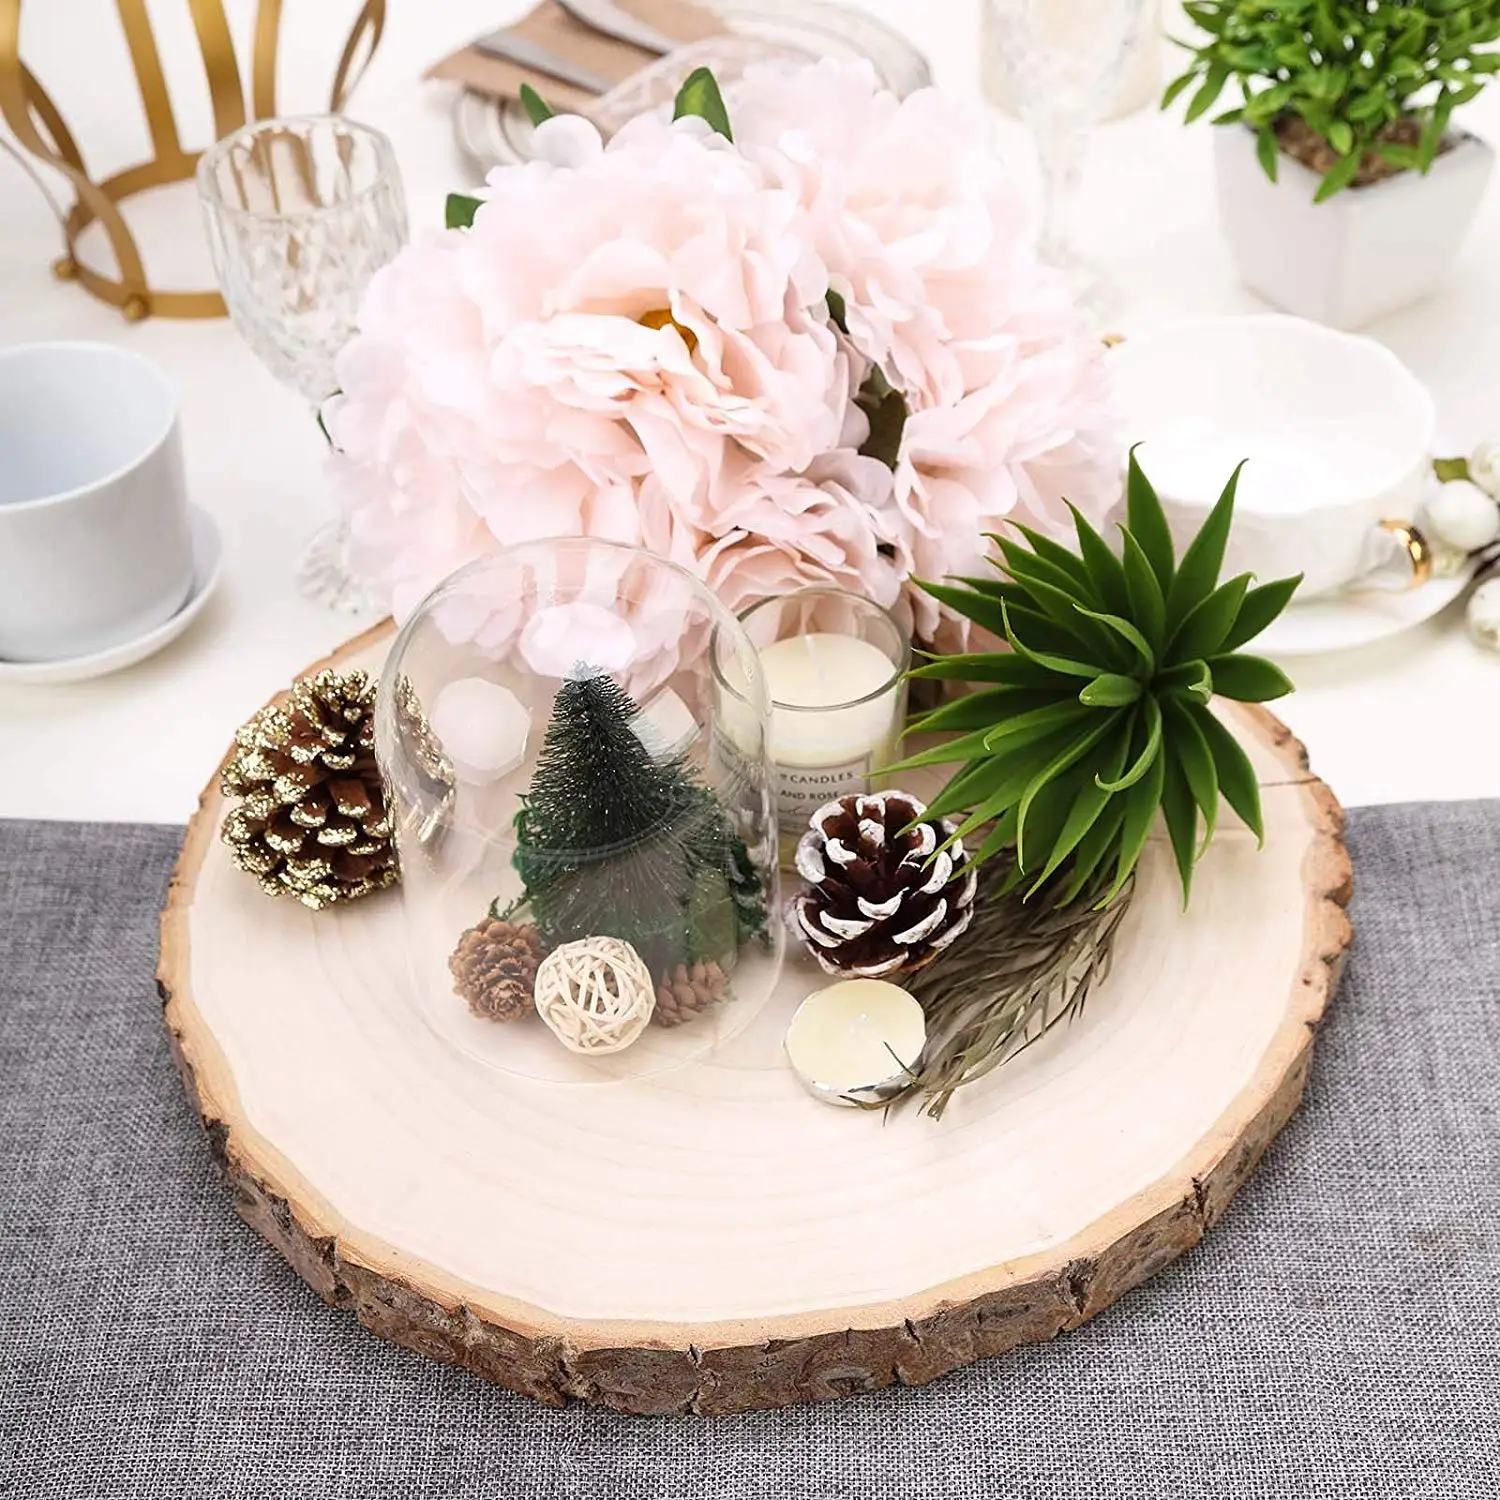 Rustic Natural Wood Slices Round Paulownia Wooden Slab Table Centerpiece Buy Wooden Slab Table Centerpiece Rustic Natural Wood Slices Round Paulownia Wooden Slab Product On Alibaba Com